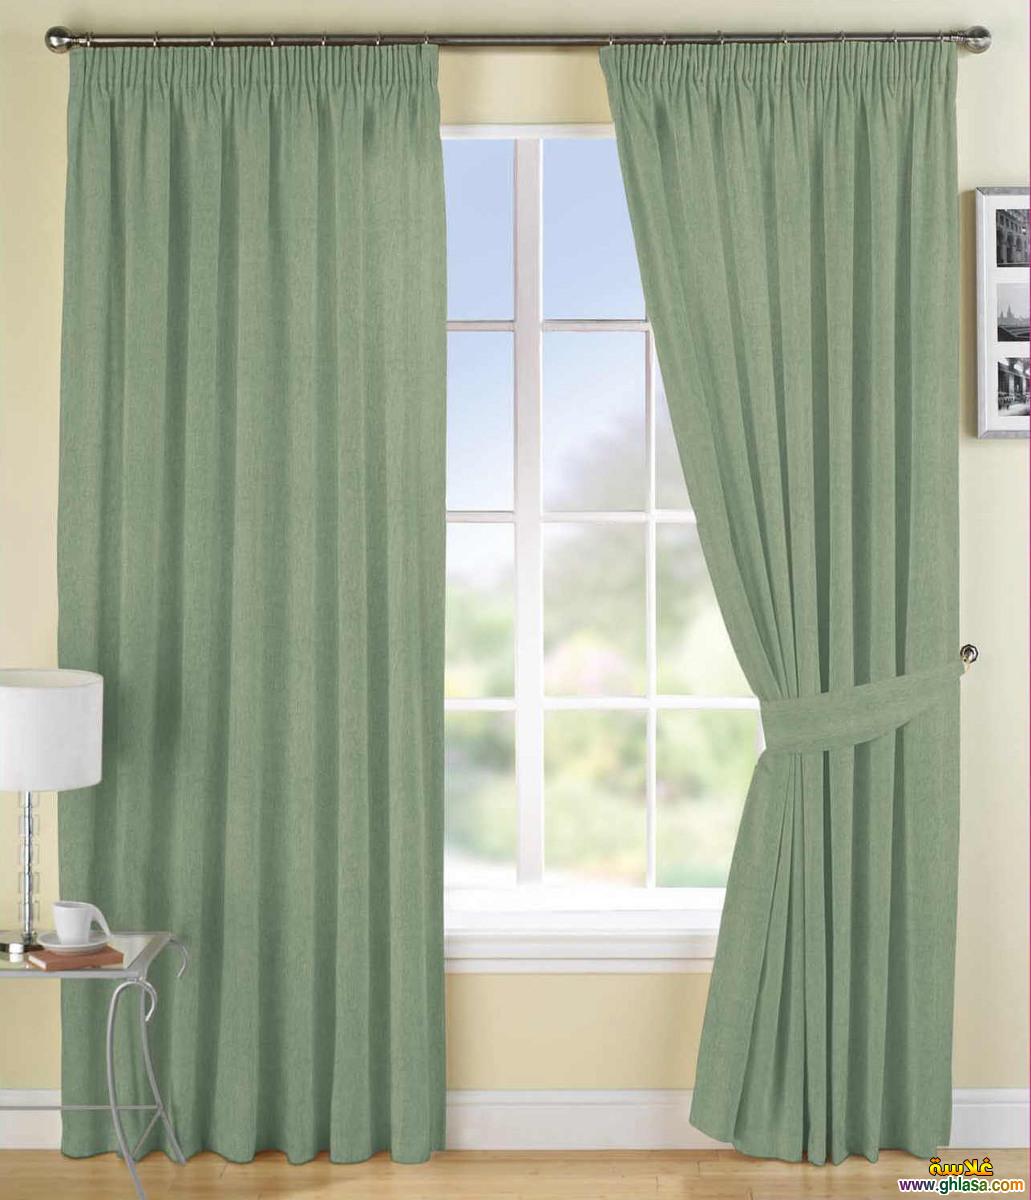   2025      2025 Curtains2025 do.php?img=15772